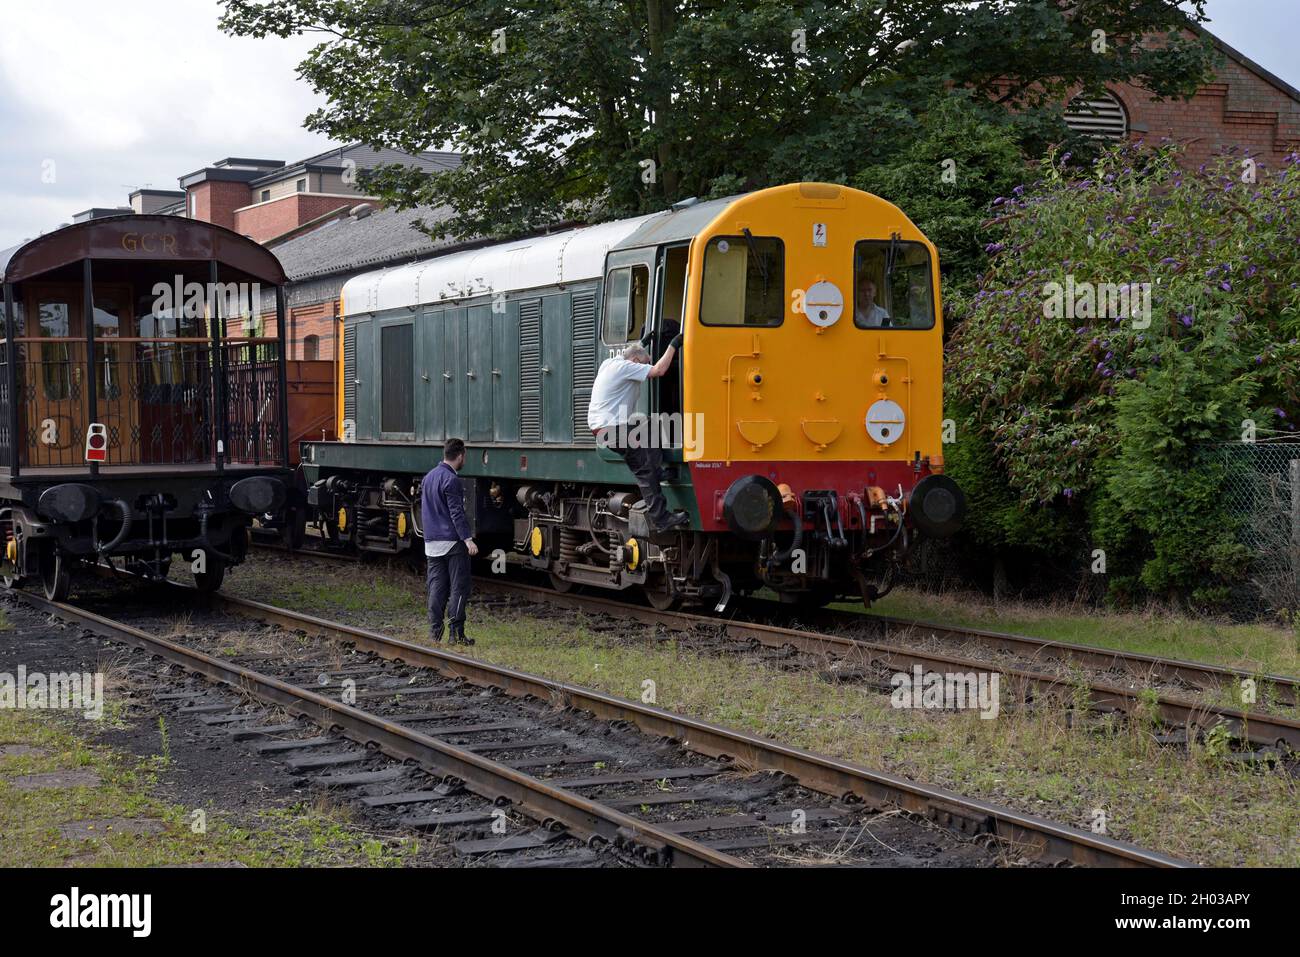 A train driver climbs into the cab of an ex British Railways Class 20 'Chopper' diesel loco at the Great Central Railway, Loughborough, August 2021 Stock Photo